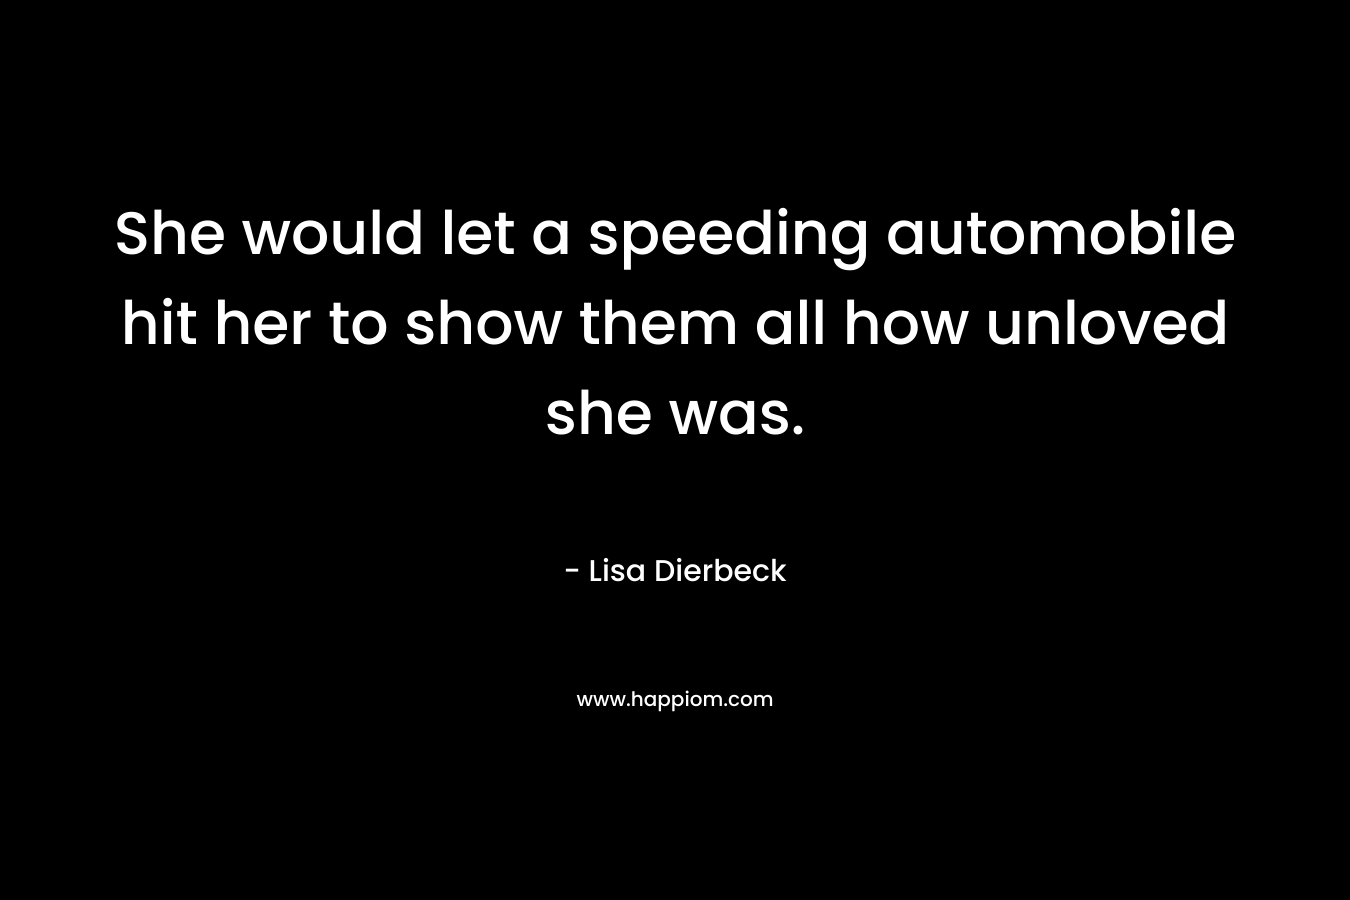 She would let a speeding automobile hit her to show them all how unloved she was. – Lisa Dierbeck